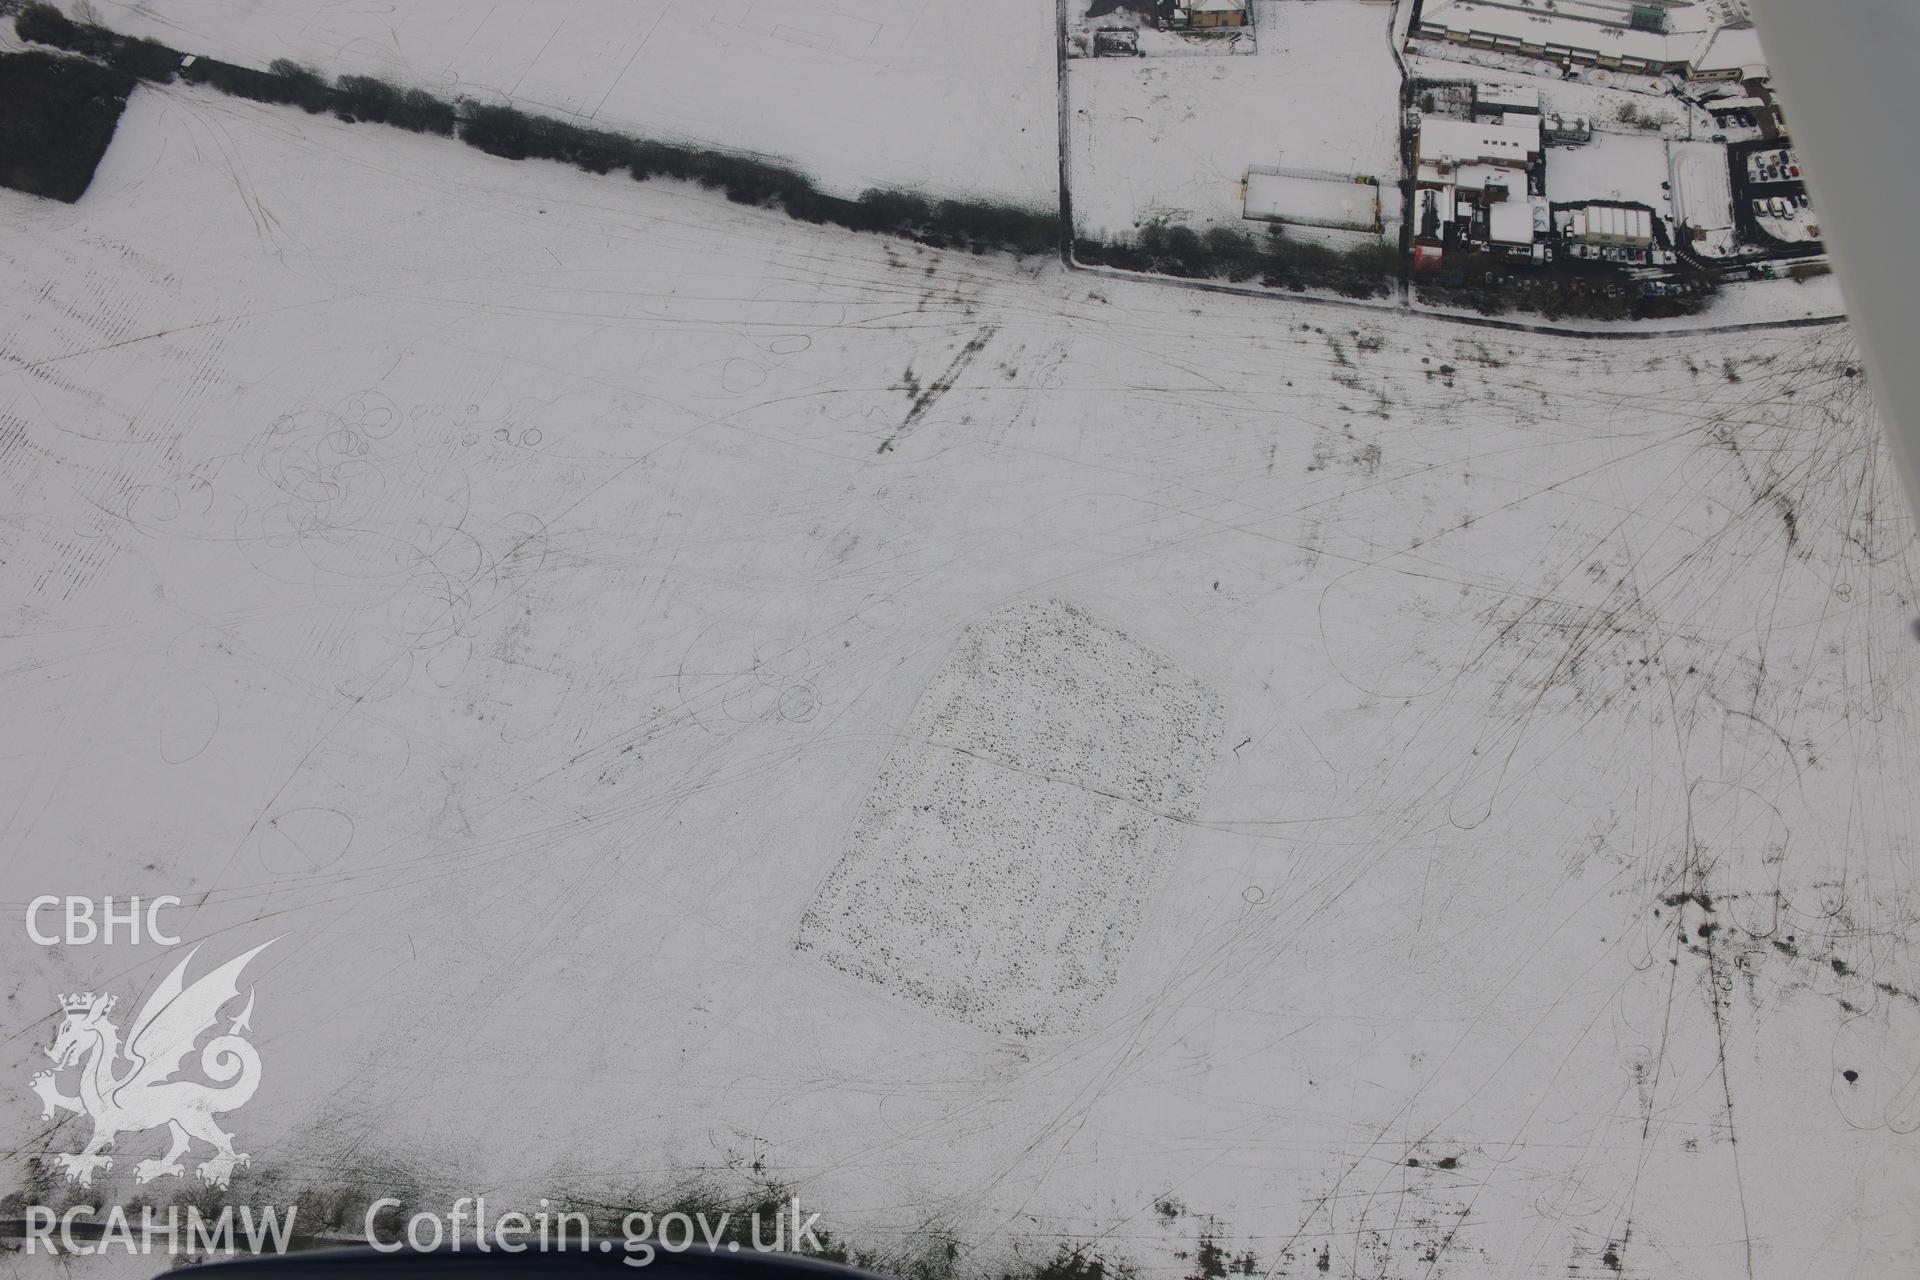 Ely Roman Villa, Caerau, east Cardiff. Oblique aerial photograph taken during the Royal Commission?s programme of archaeological aerial reconnaissance by Toby Driver on 24th January 2013.